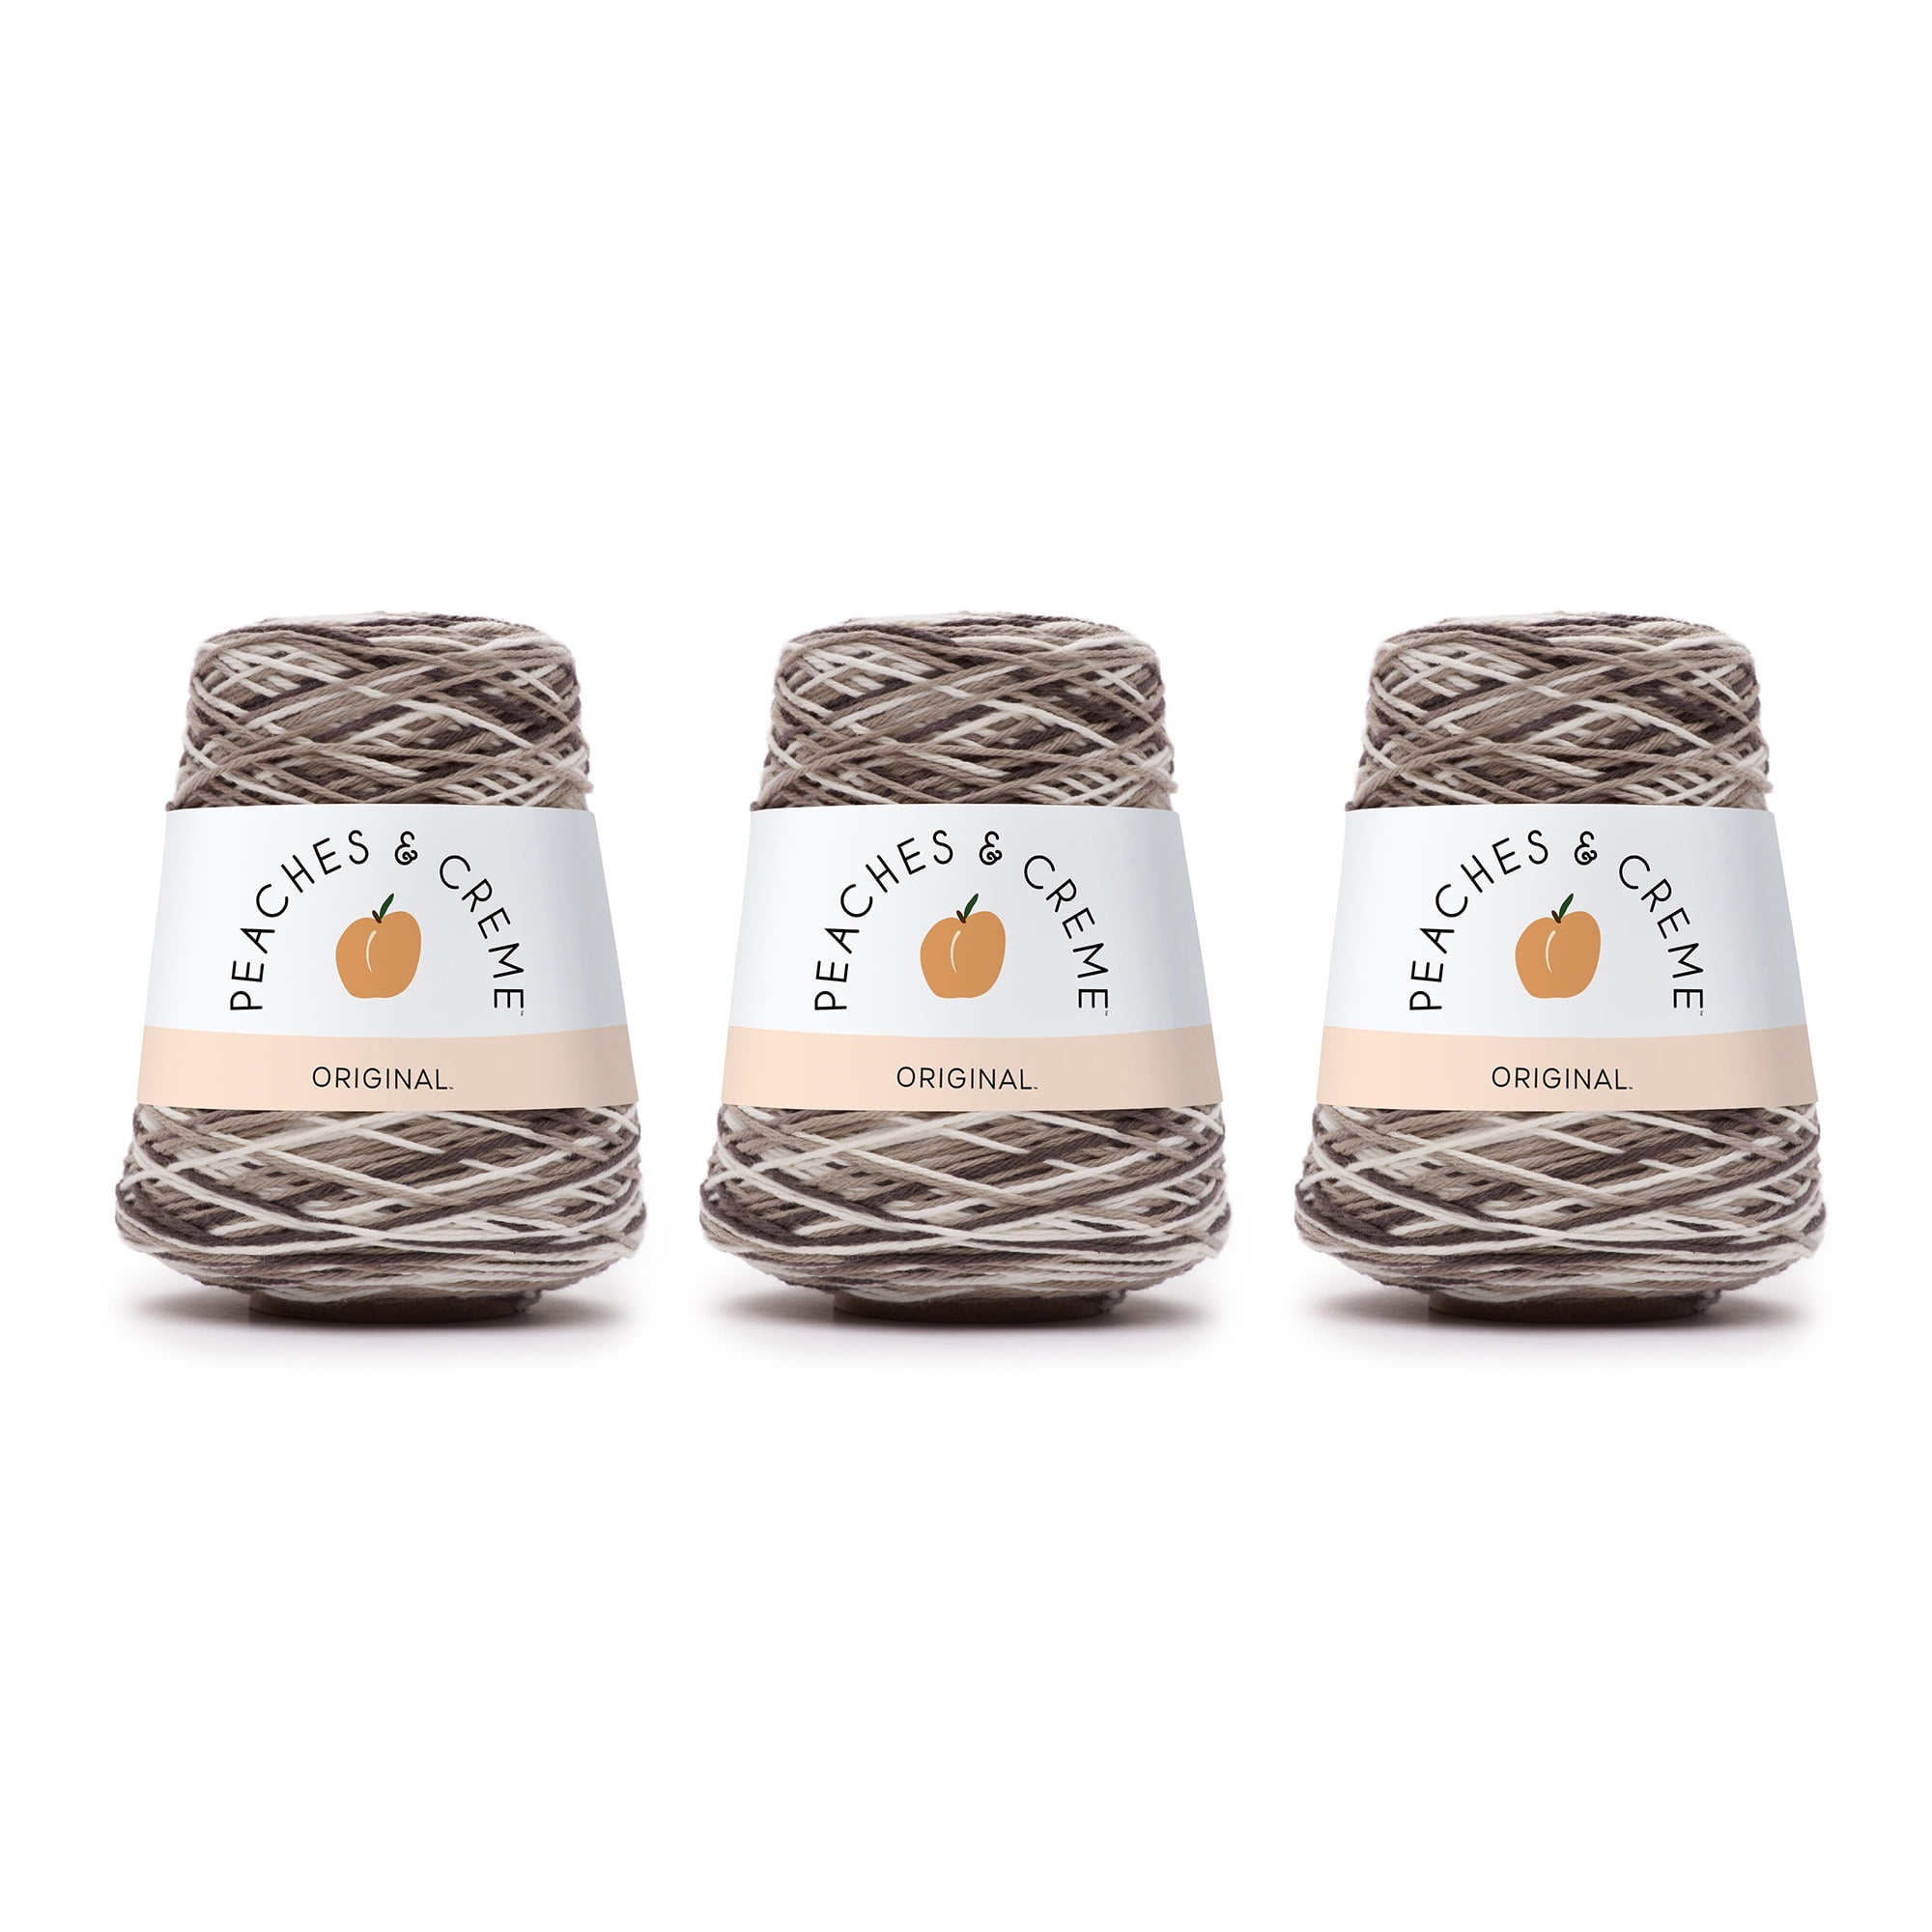 Lion Brand Yarn Comfy Cotton Blend Mai Tai Varigated Light Cotton, Polyester  Multi-color Yarn 3 Pack 